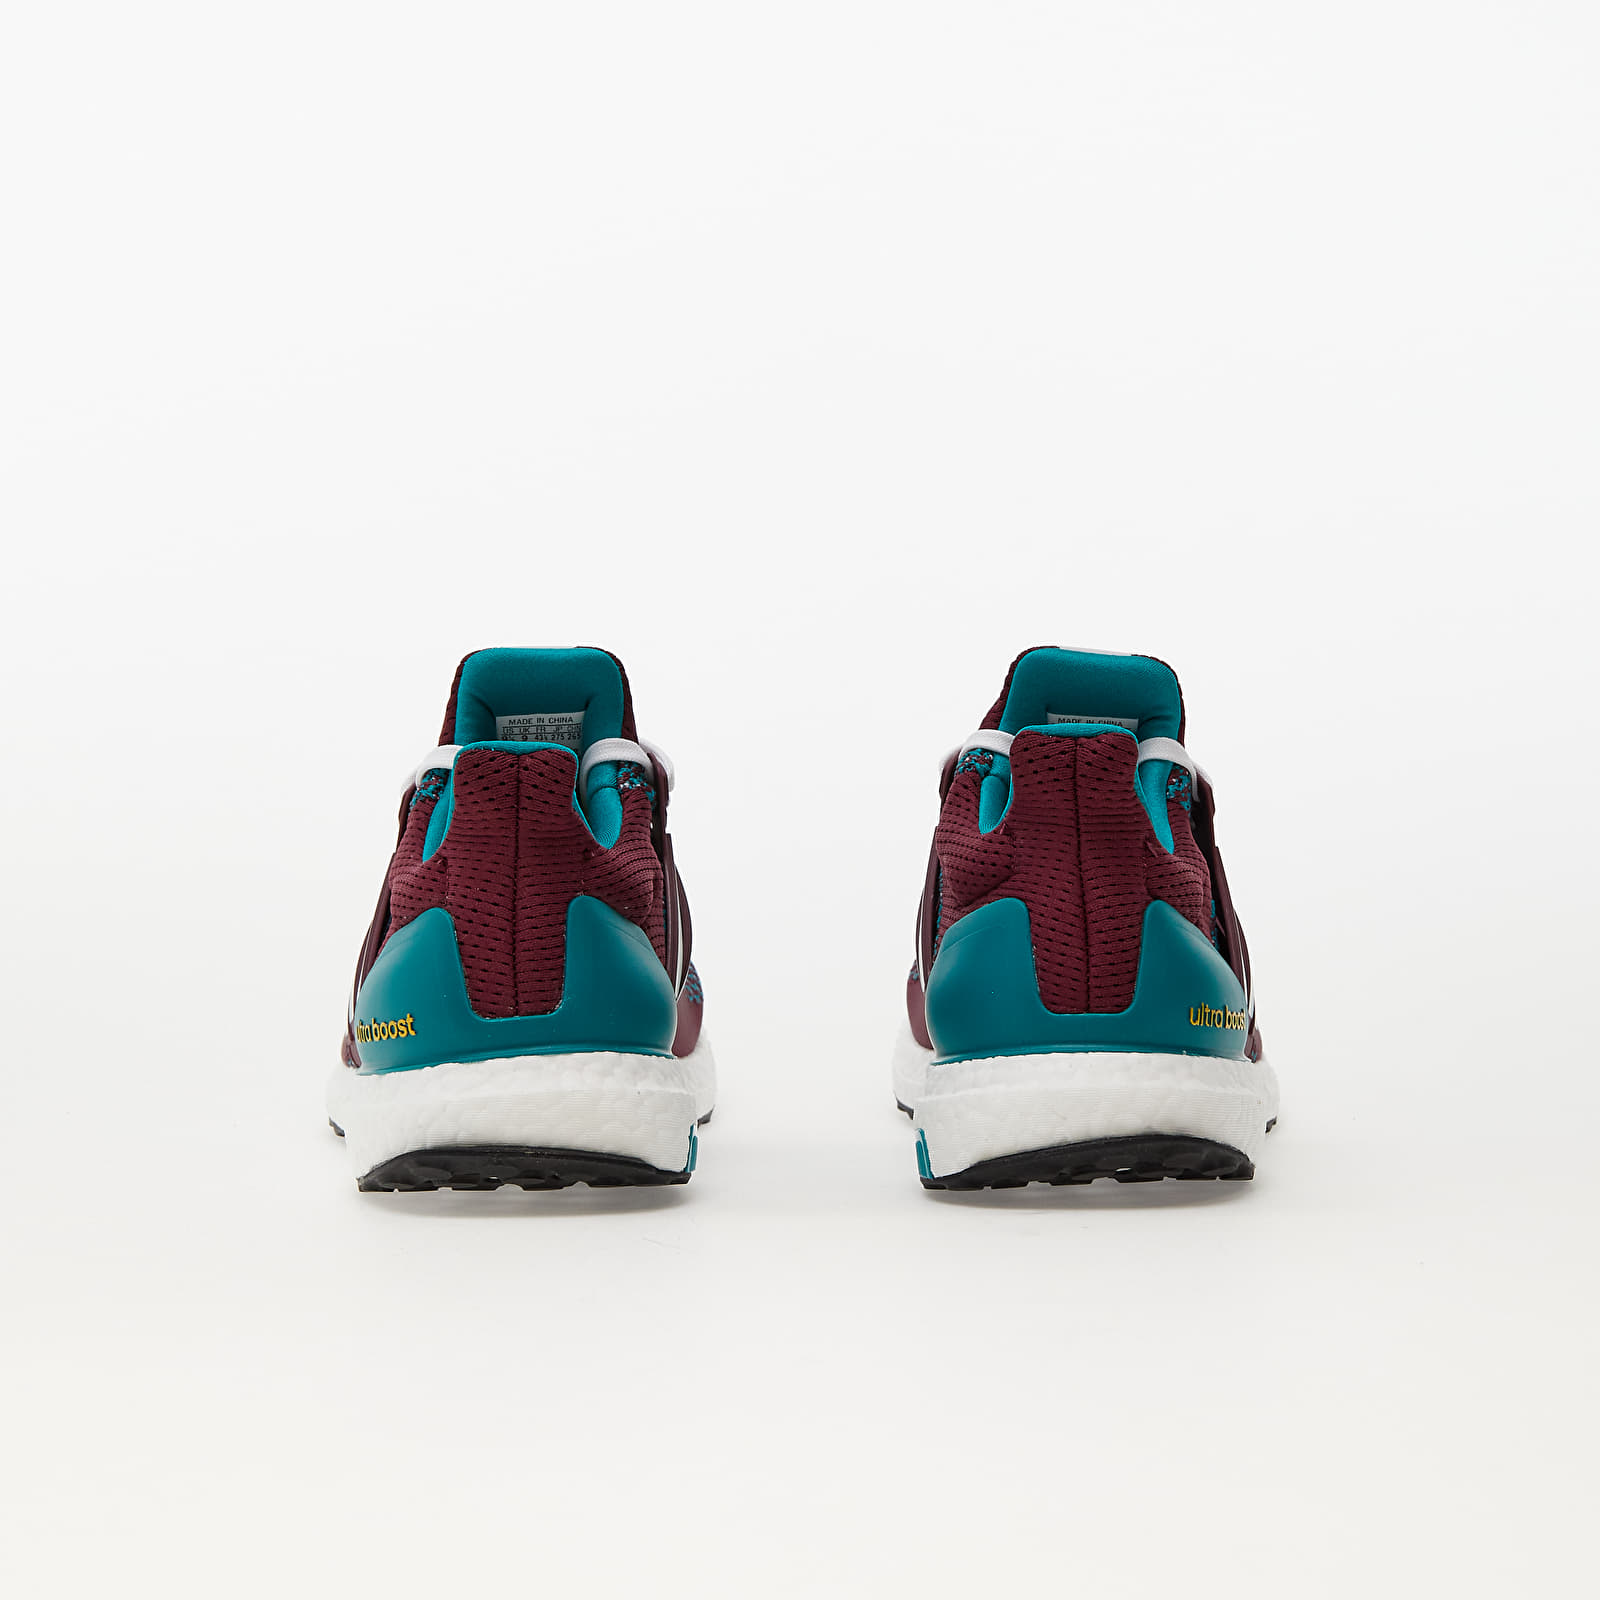 adidas Running Ultraboost x Mighty Ducks trainer in green and